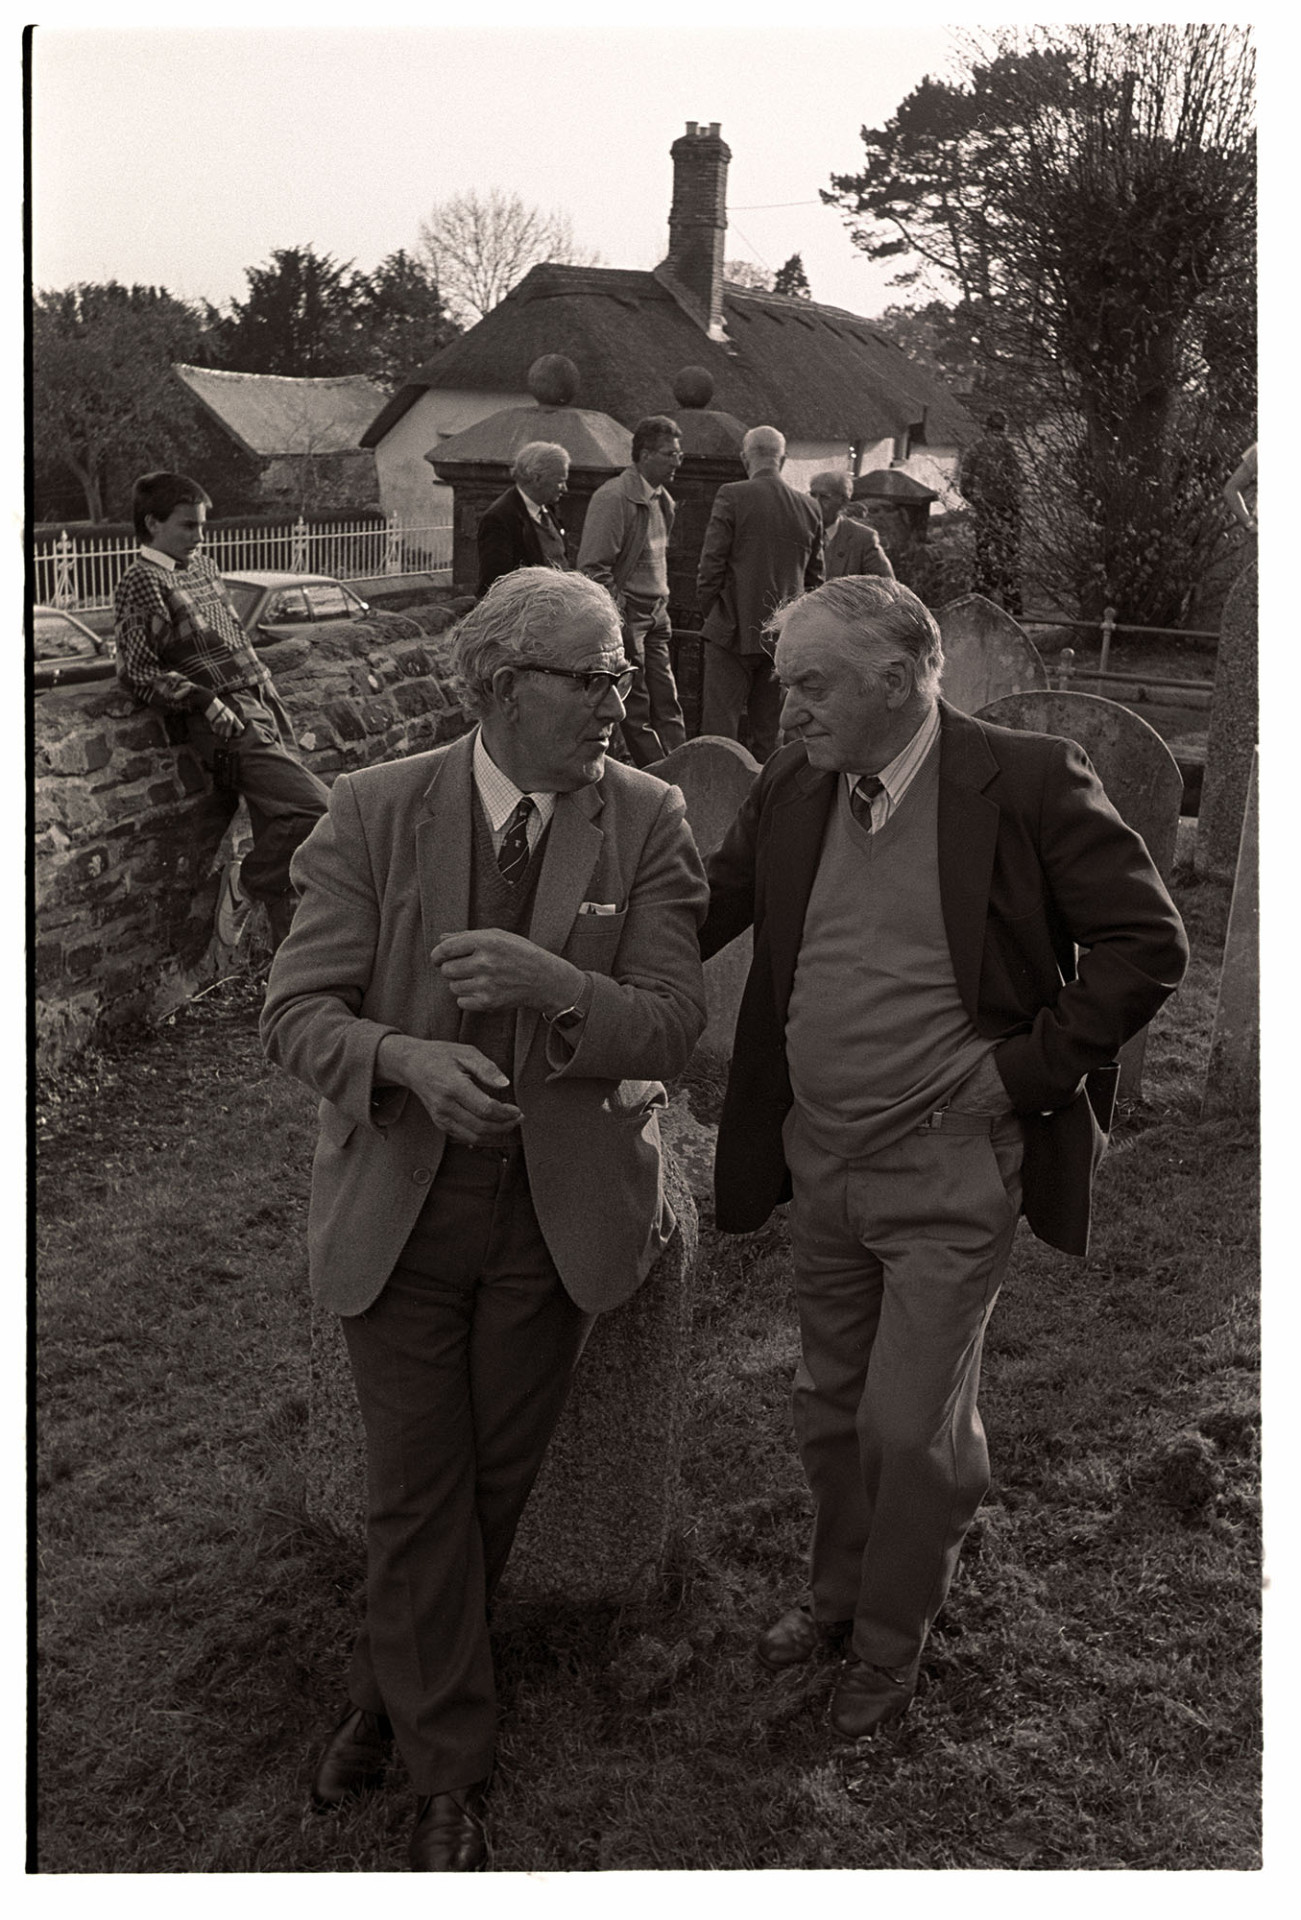 Bellringers standing in graveyard chatting. 
[Bell ringer talking in the churchyard at Chulmleigh at a bell ringing competition. Two men are talking in the foreground, one of which is leaning on a gravestone.]